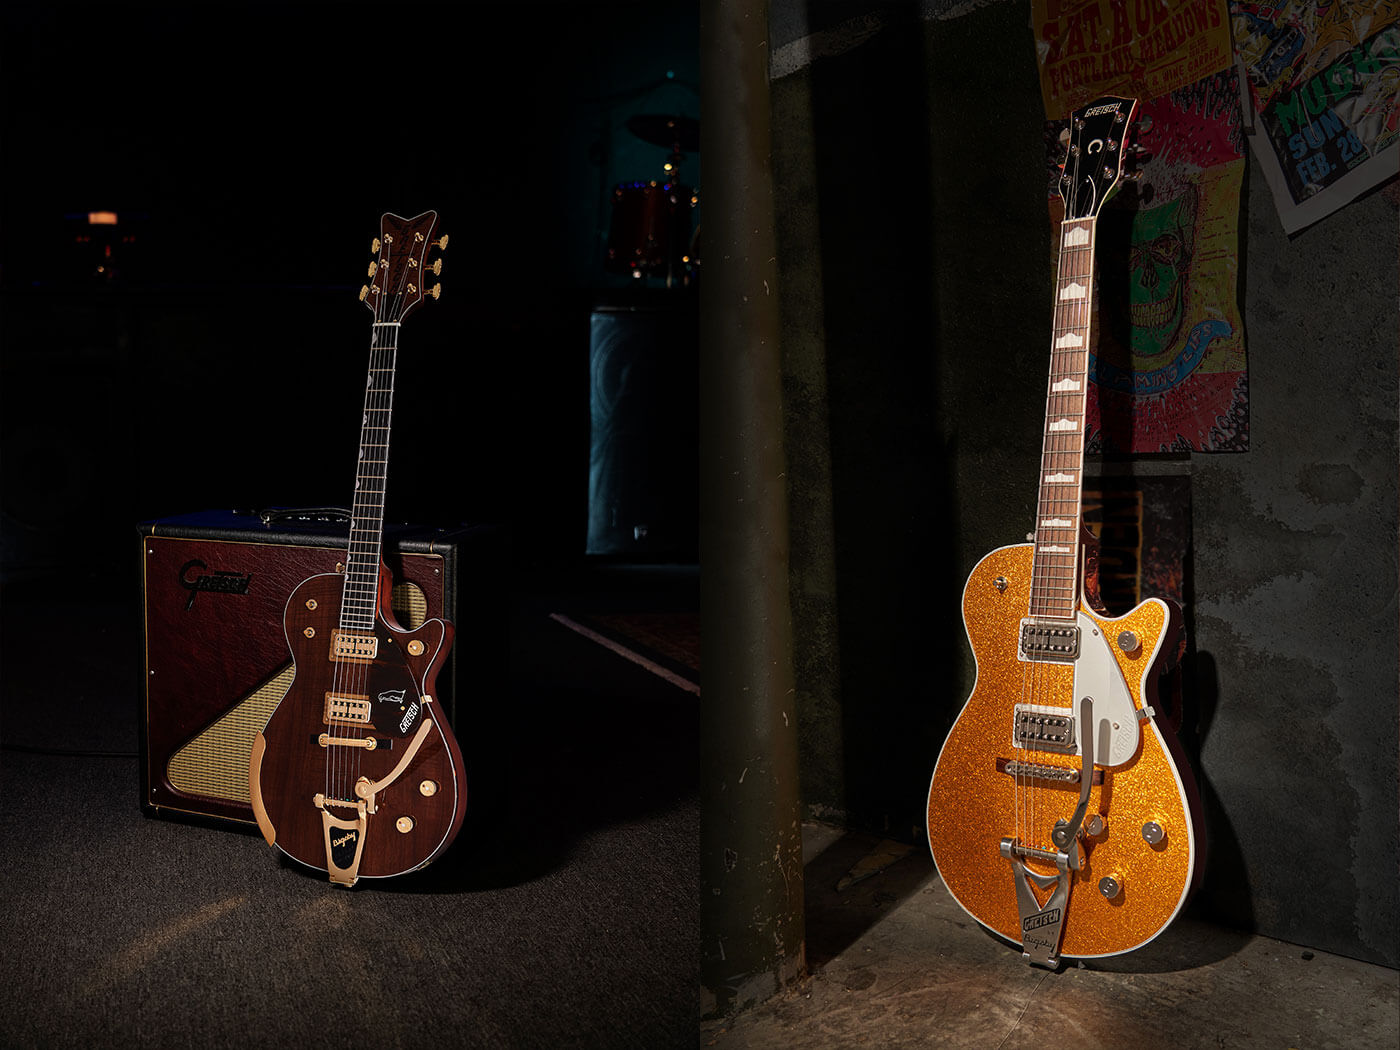 Two of Gretsch's new models for 2021